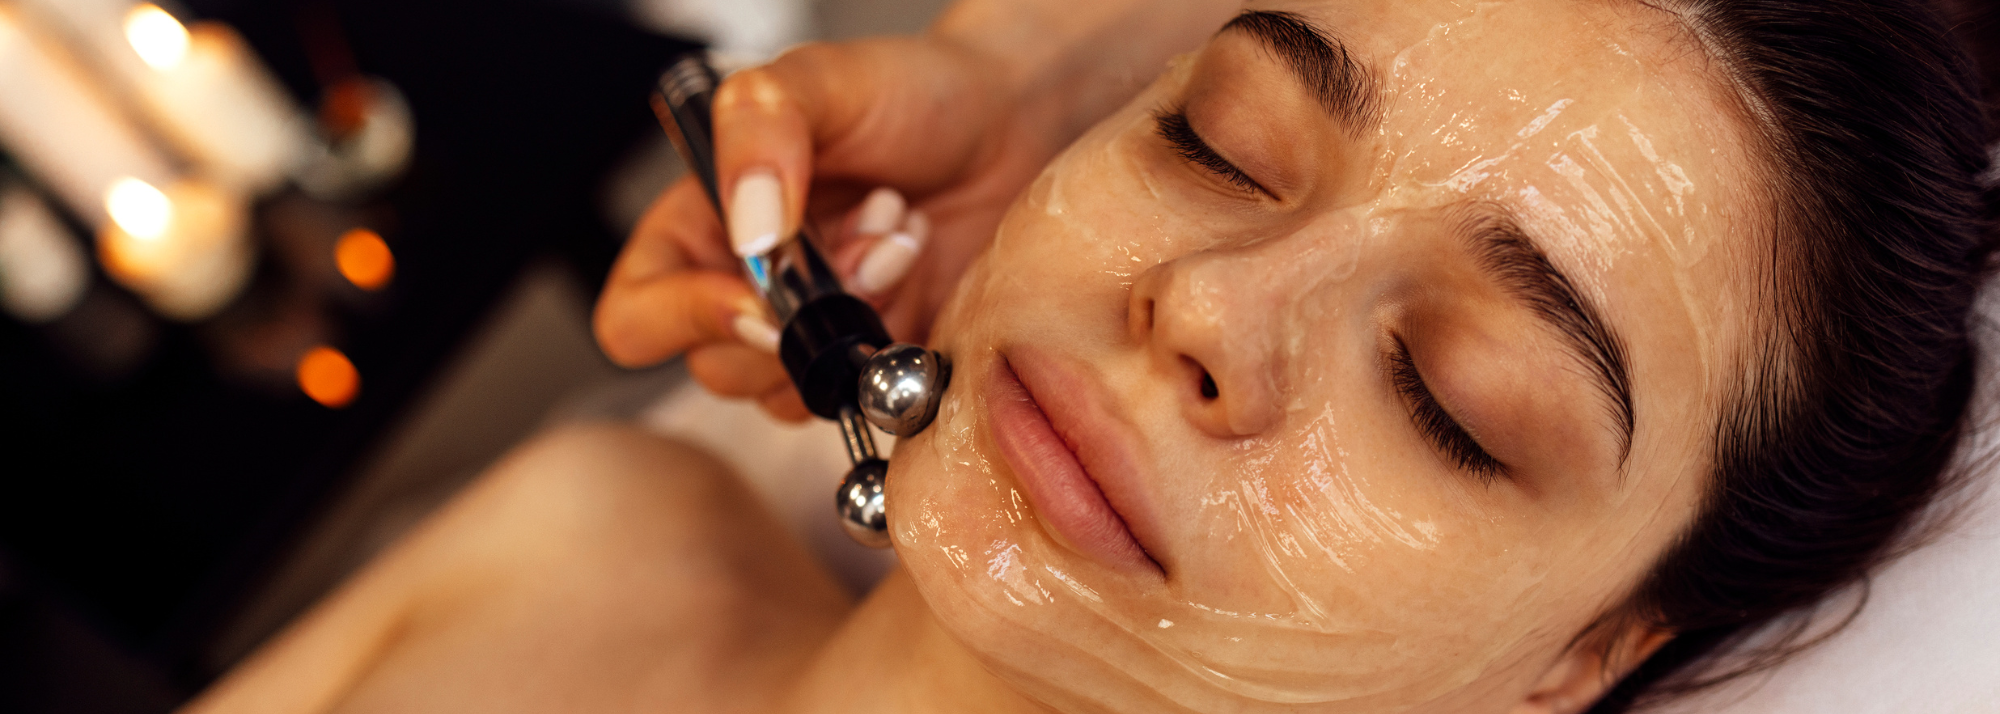 The Benefits of Microcurrent Facials - Skin Care blog by NeoGenesis